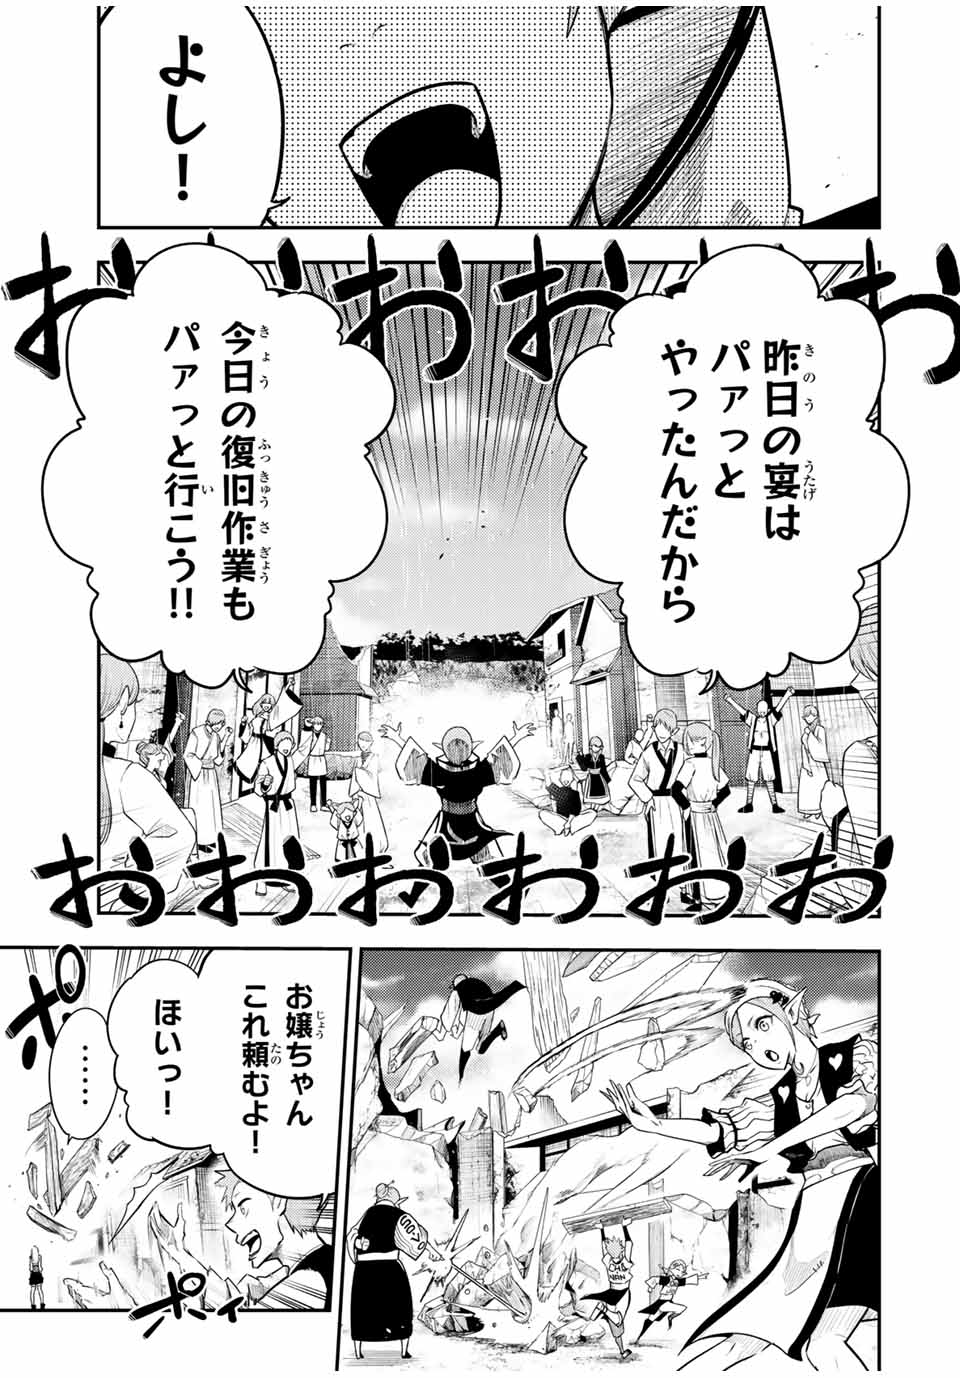 the strongest former prince-; 奴隷転生 ～その奴隷、最強の元王子につき～ 第50話 - Page 9